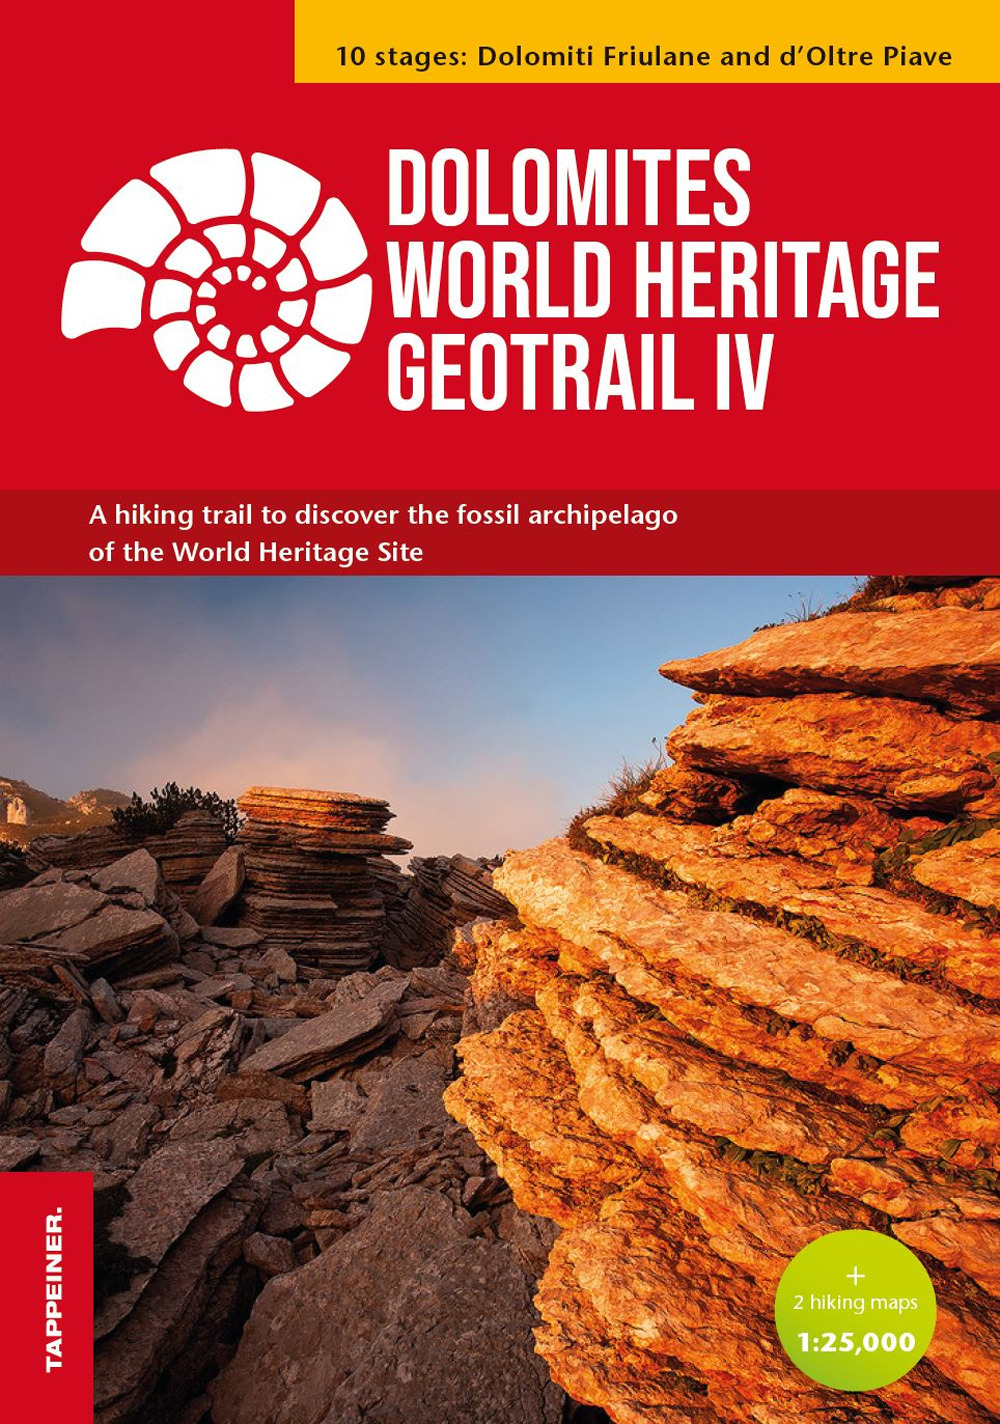 Dolomites World Heritage Geotrail. A hiking trail to discover the fossil archipelago of the World Heritage Site. Vol. 4: 10 stages: Dolomiti Friulane and d'Oltre Piave